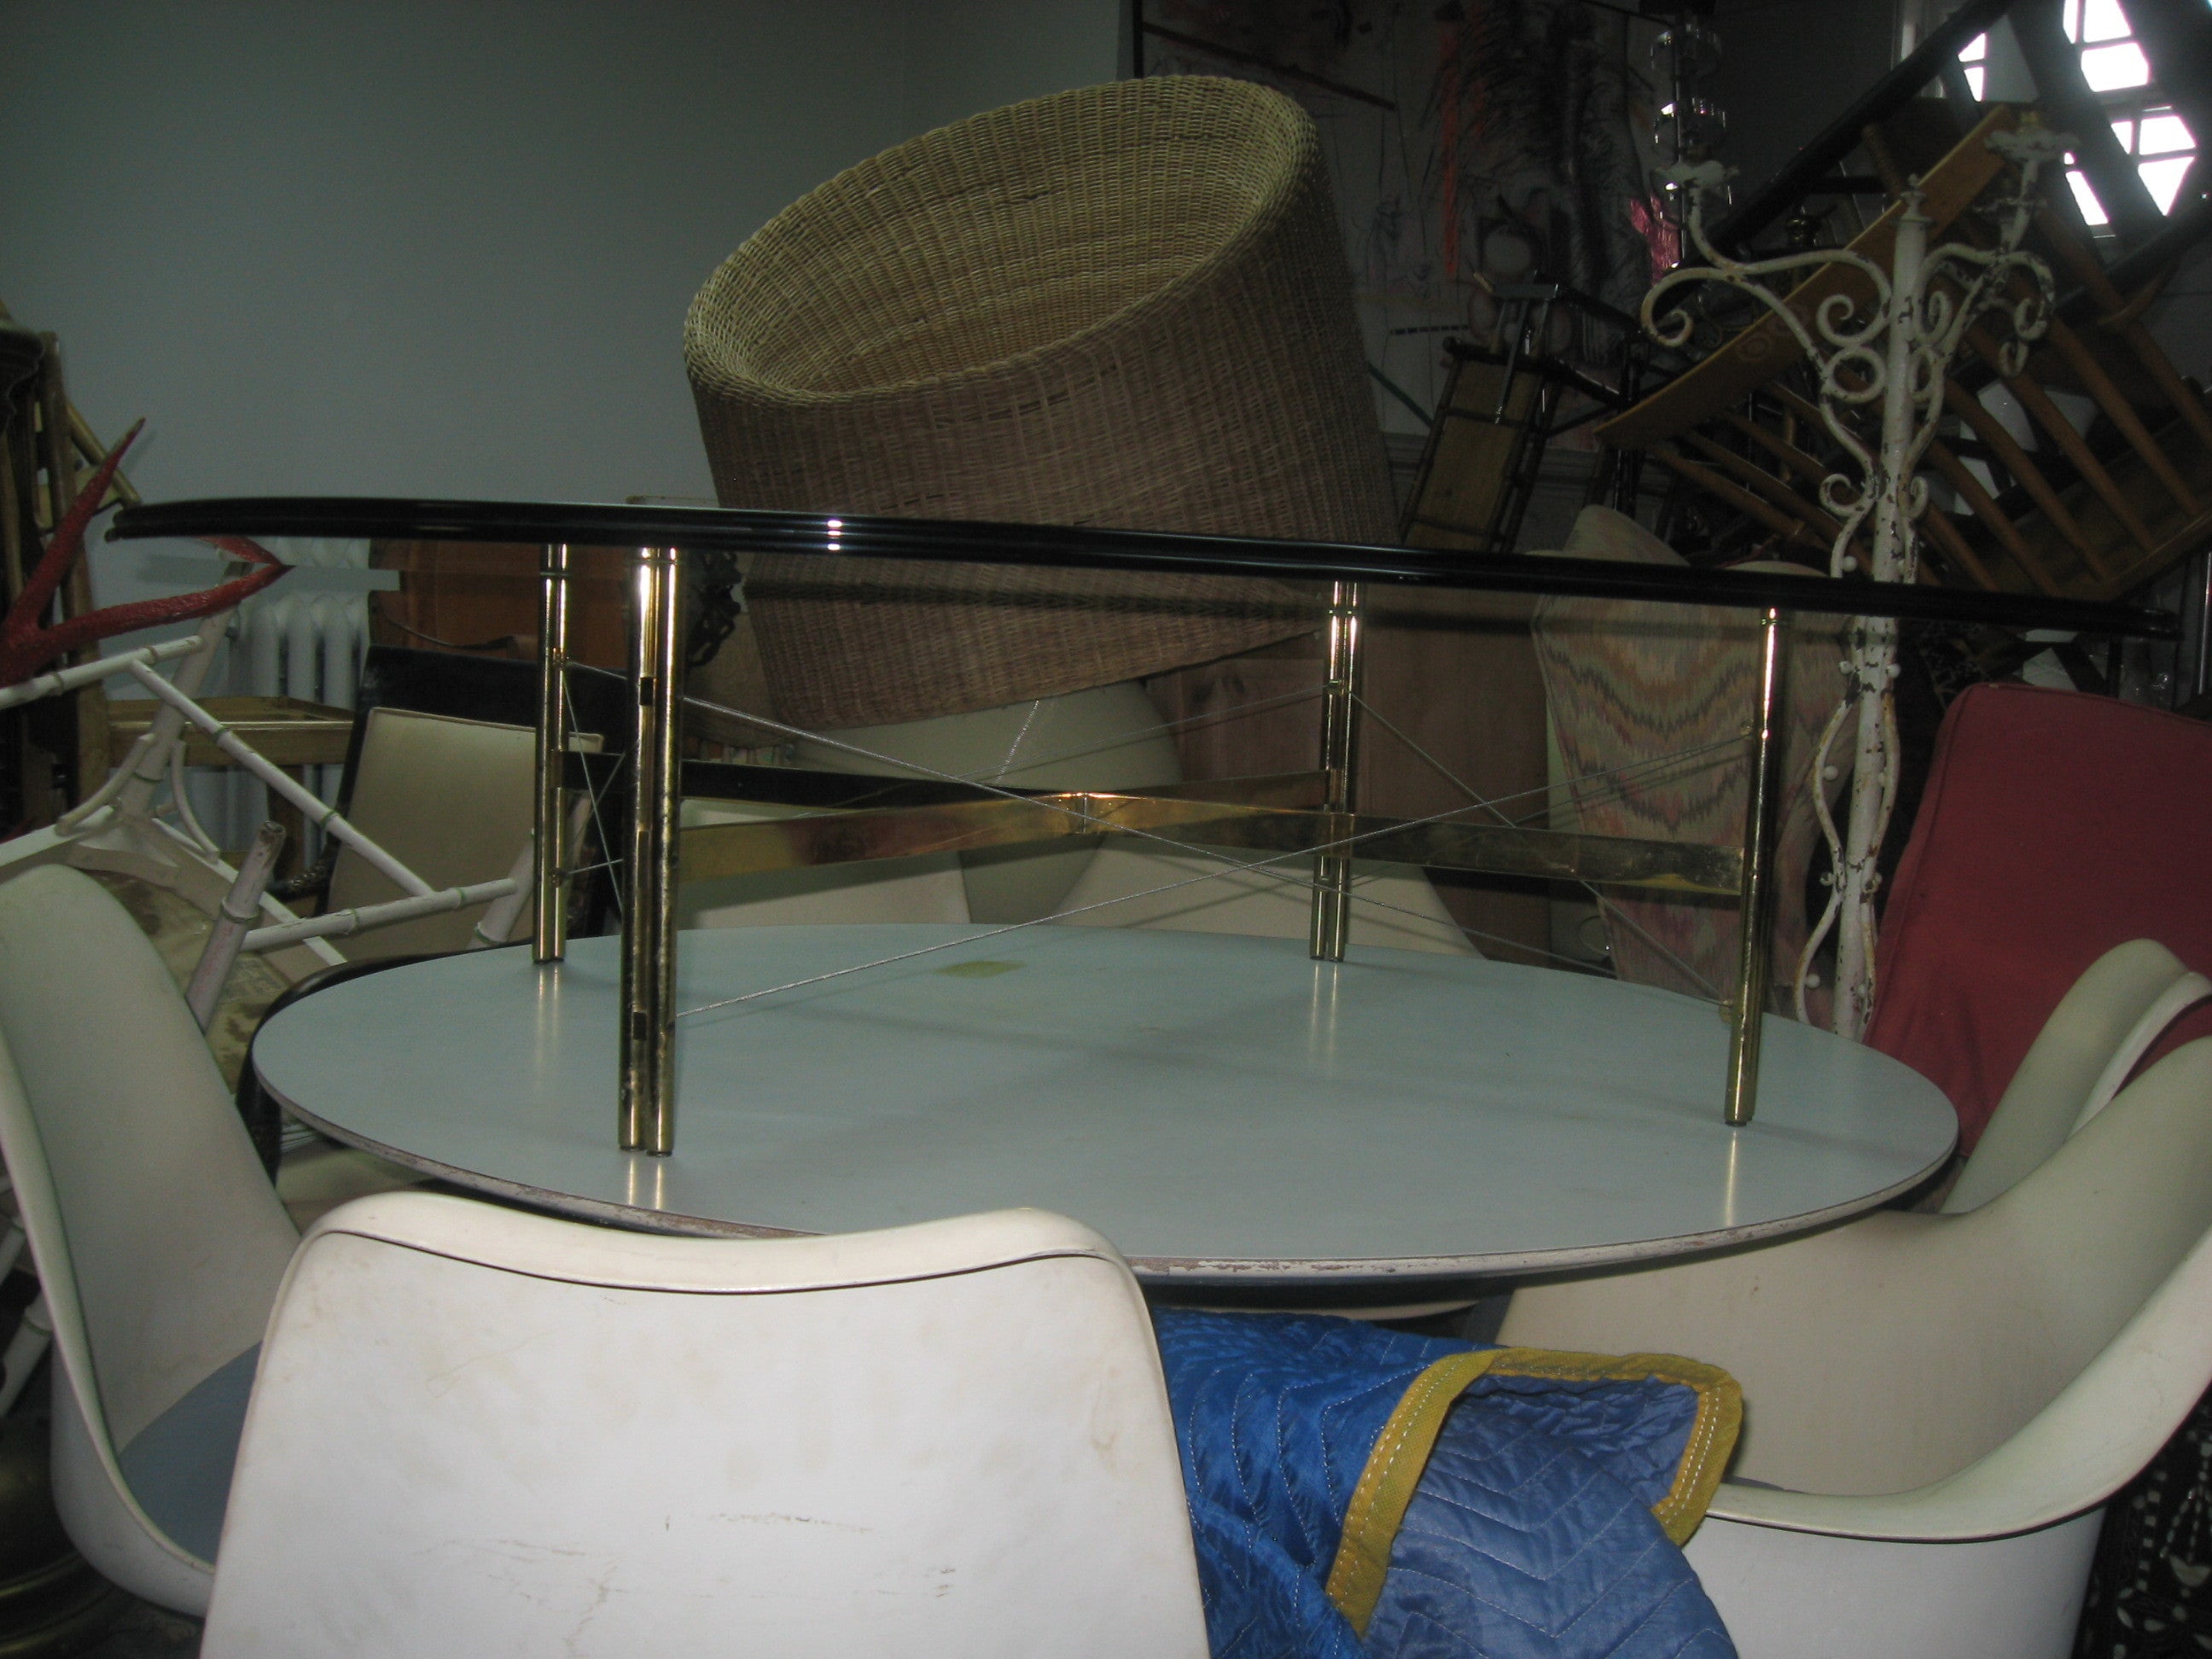 Mid-Century Brass and Glass Coffee Table